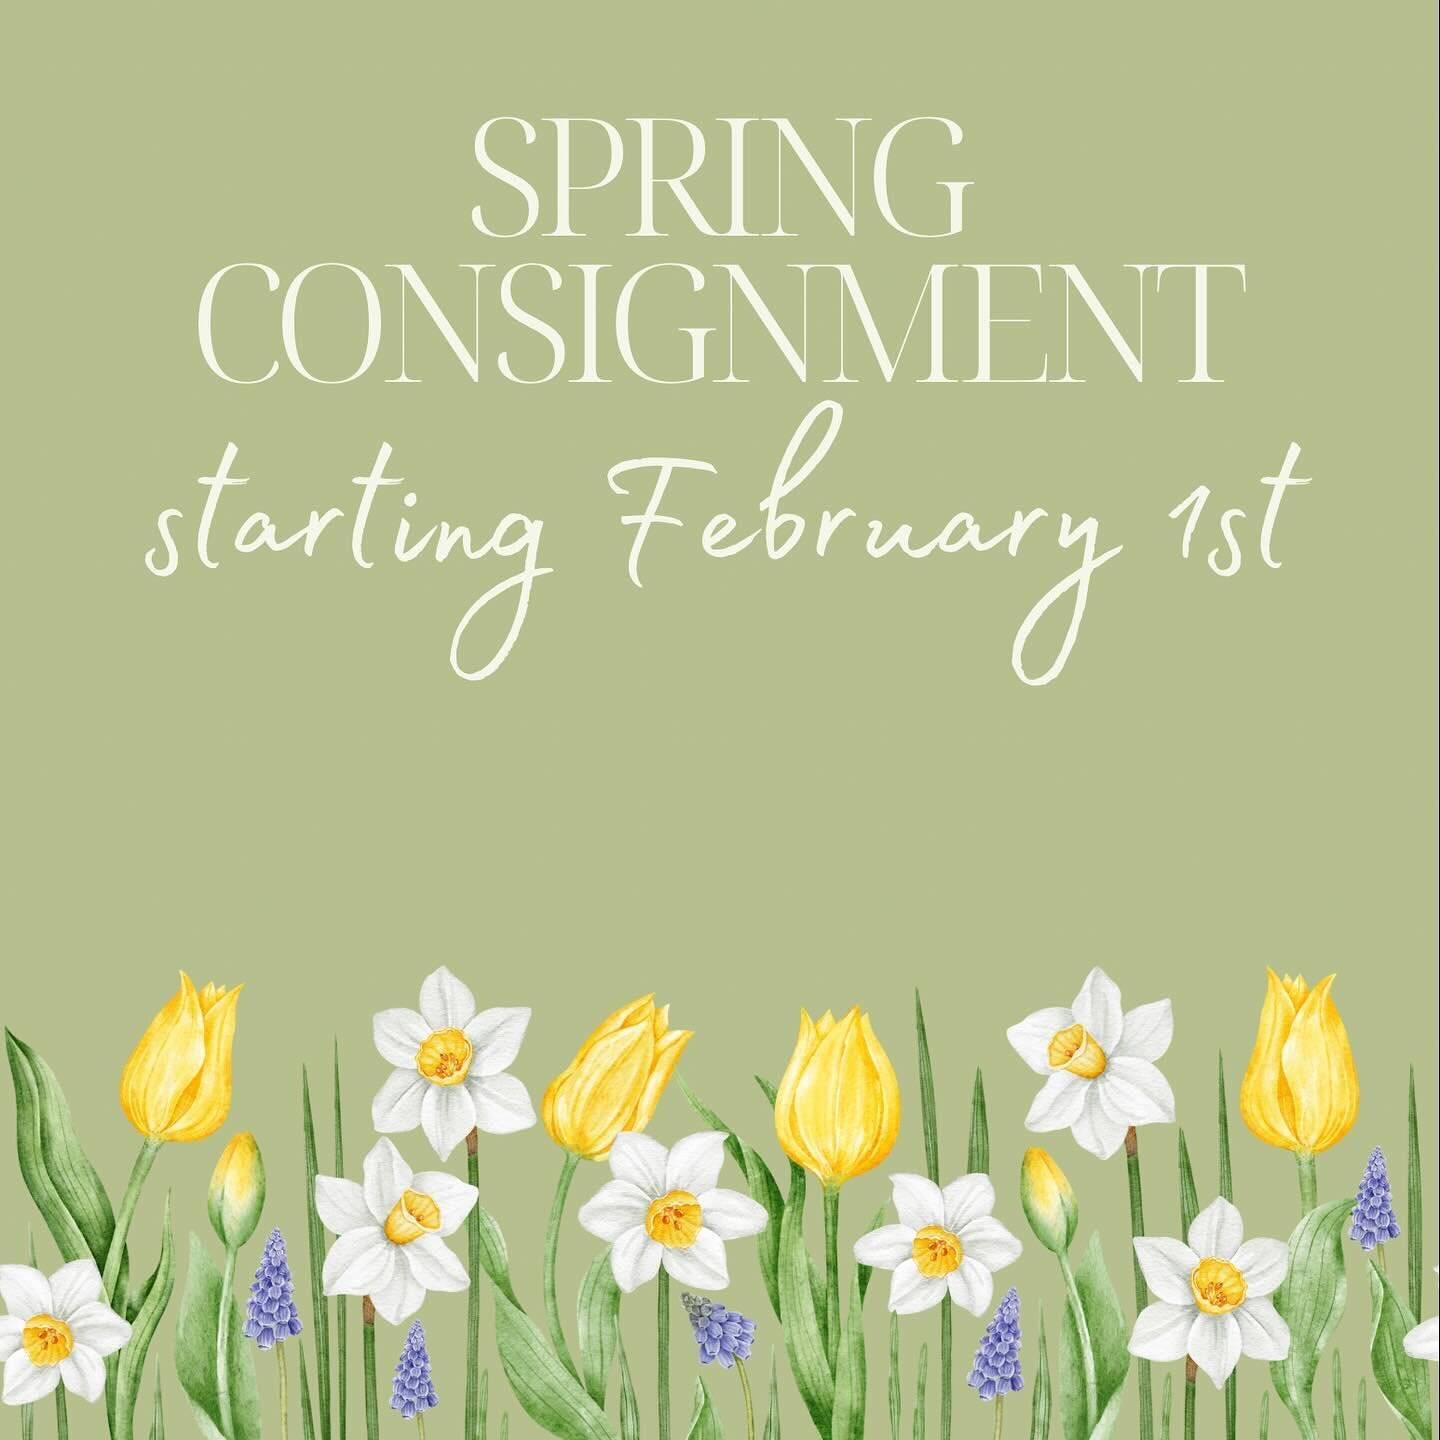 We are not taking consignment until February 1st! In the meantime, stop by and get a great deal. 

#theclosetexchange #consignment #boutique #northwestindiana #valparaisoindiana #localbusiness #smallbusiness #smallbusinessowner #midwest